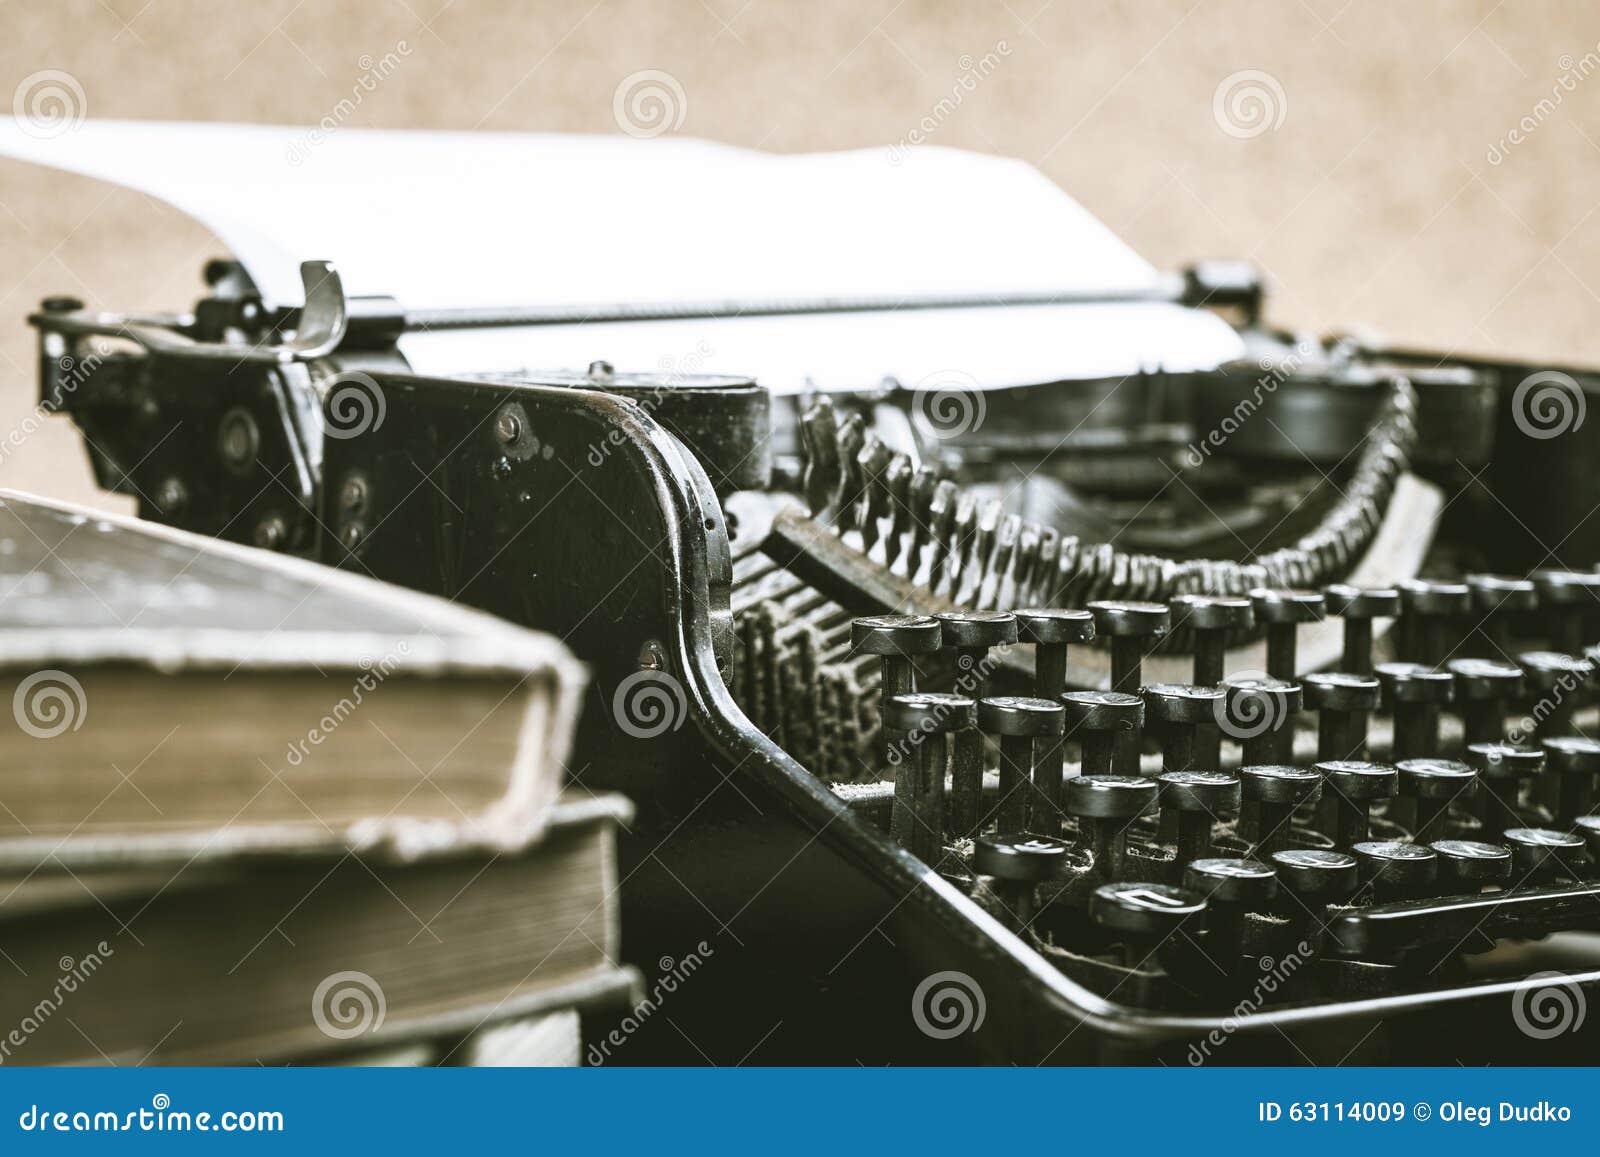 22,141 Old Typewriter Paper Stock Photos - Free & Royalty-Free Stock Photos  from Dreamstime